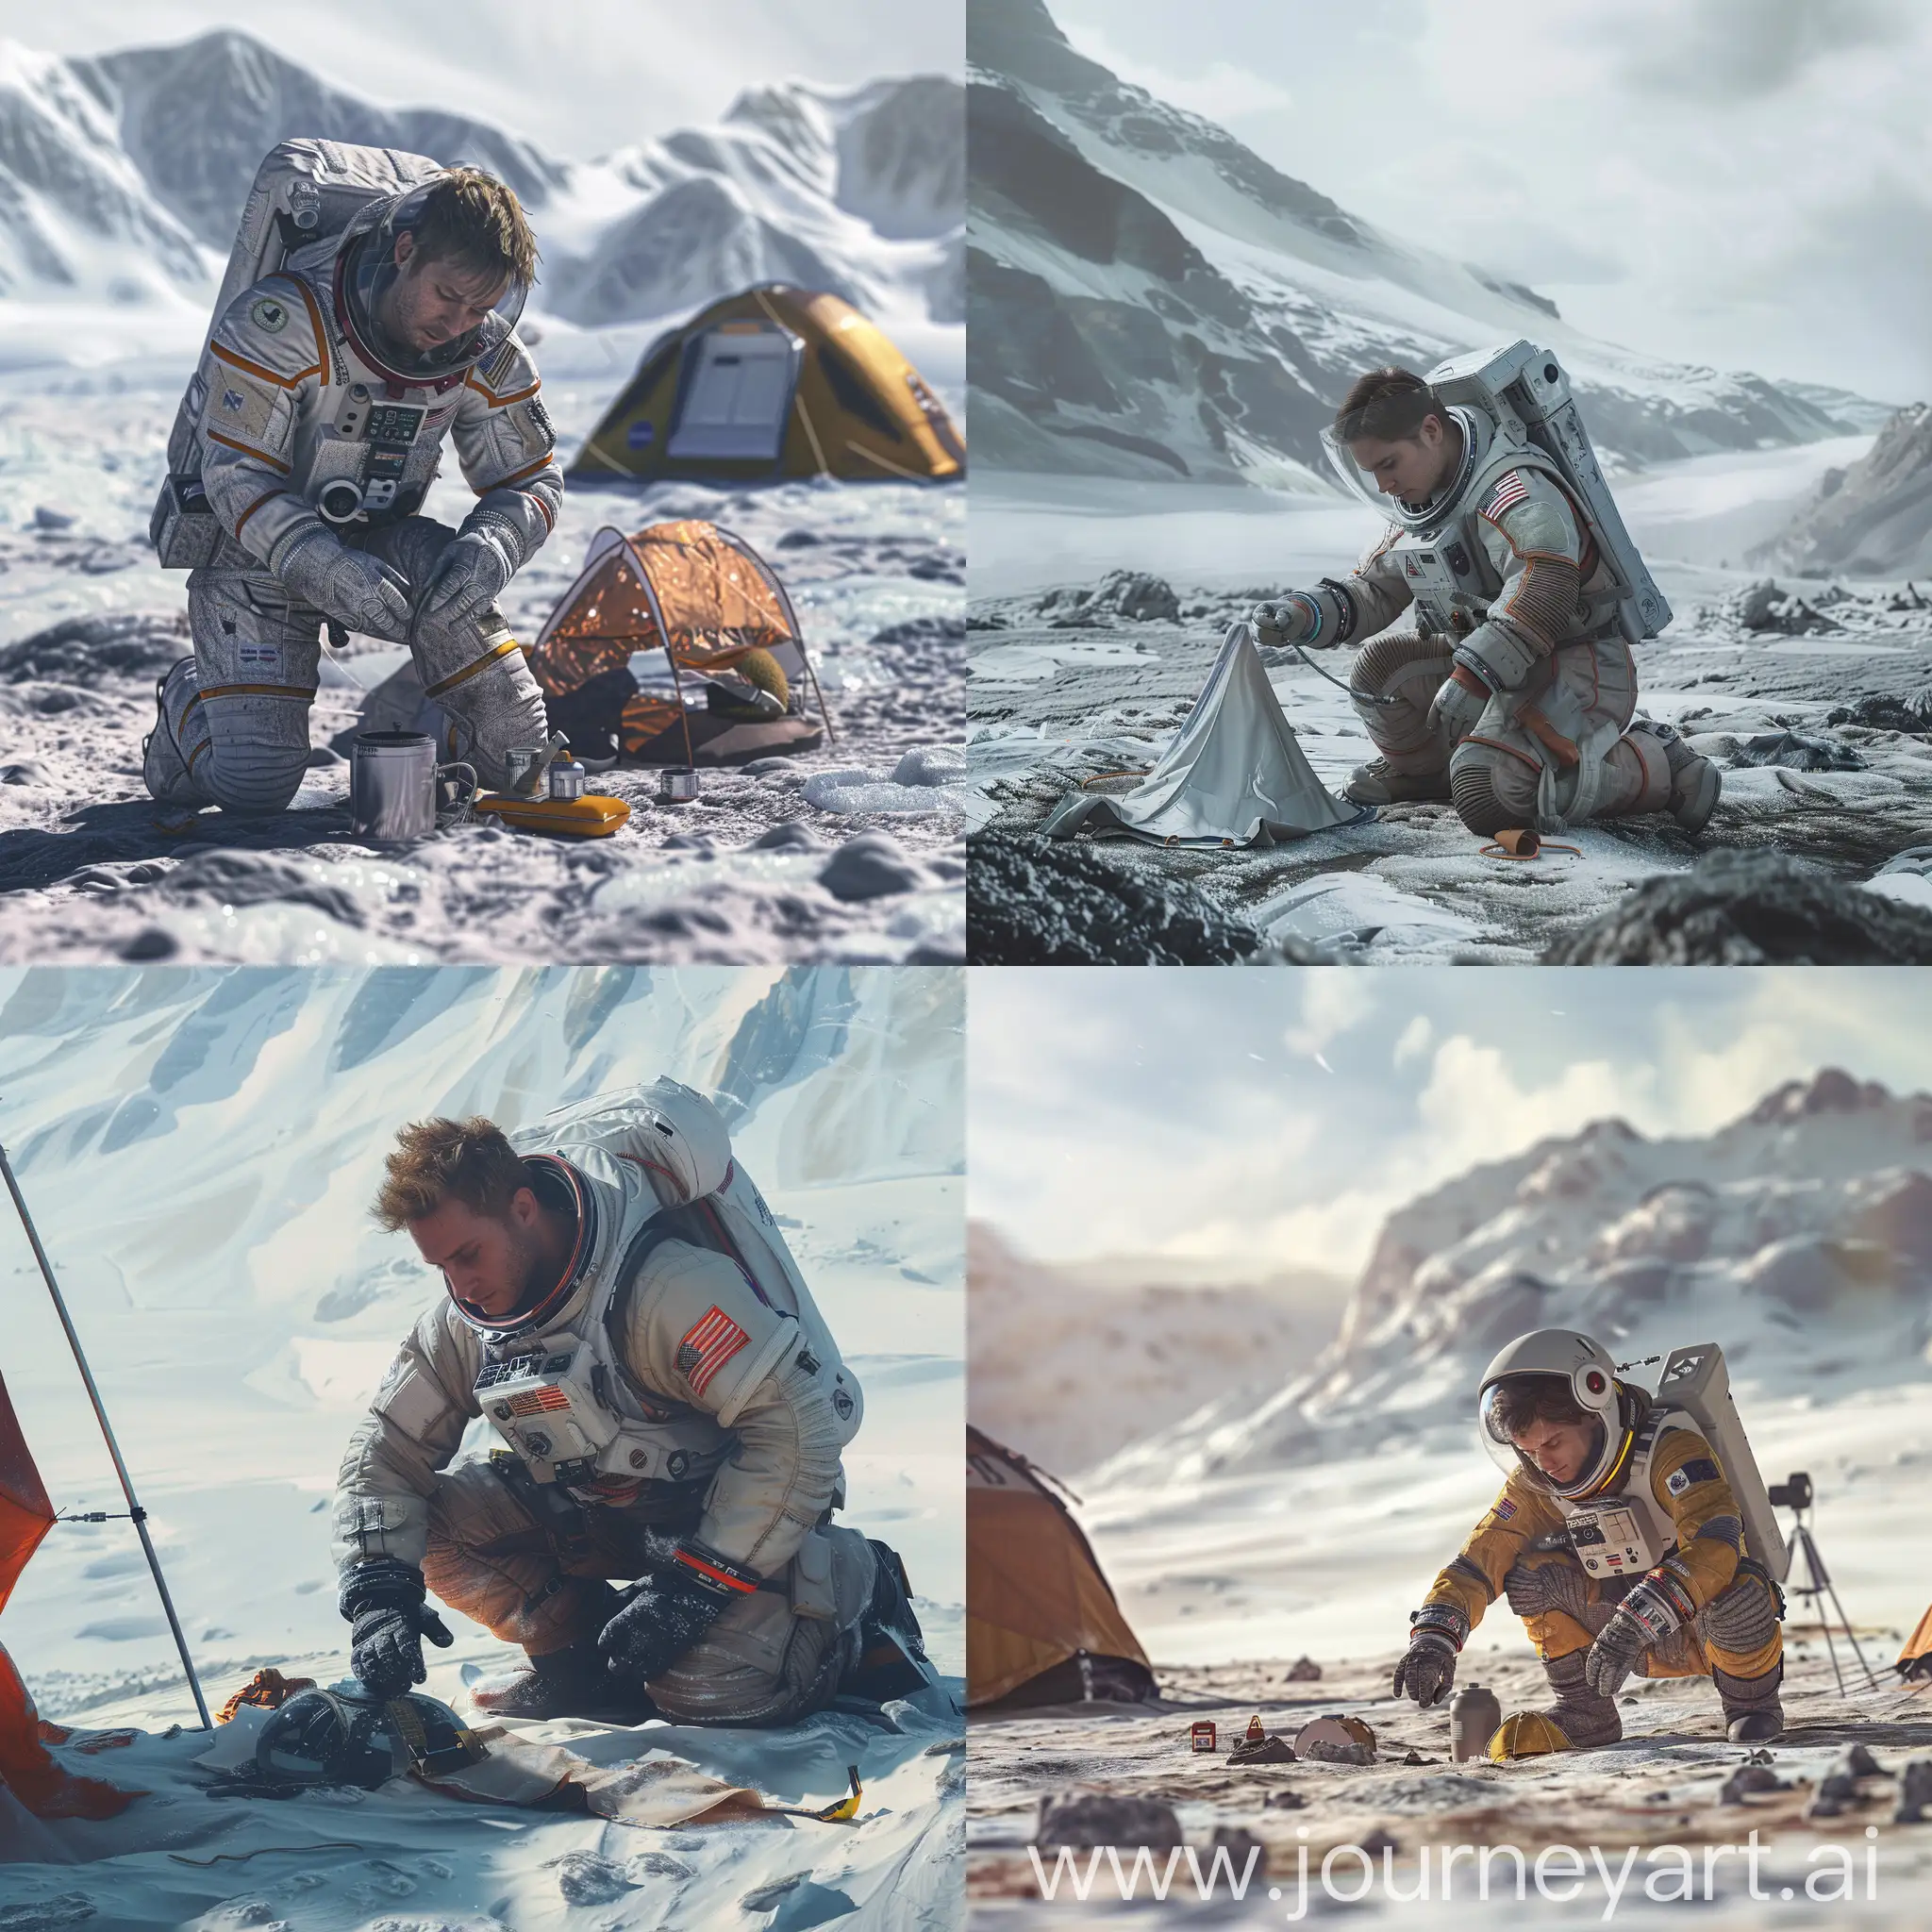 a medic astronaut alone on a wasted frozen planet setting up a small camp. wide landscape realistic design. no helmet he looks 28. light brown hair